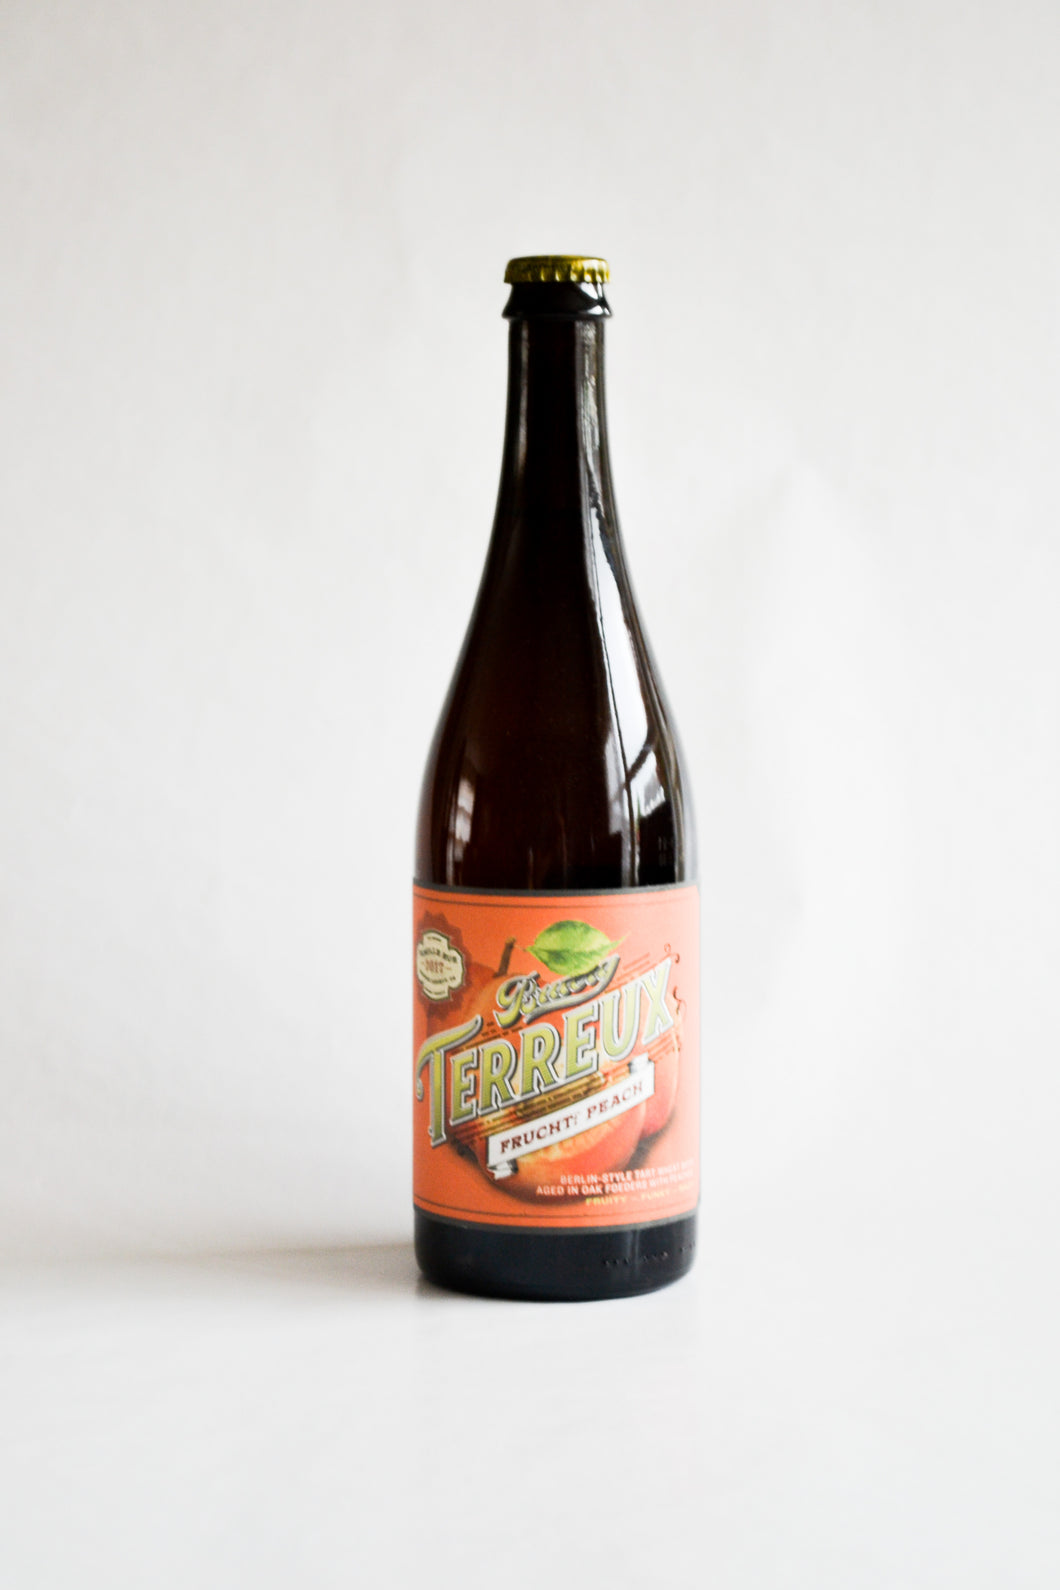 The Bruery Terreux - Frucht: Peach